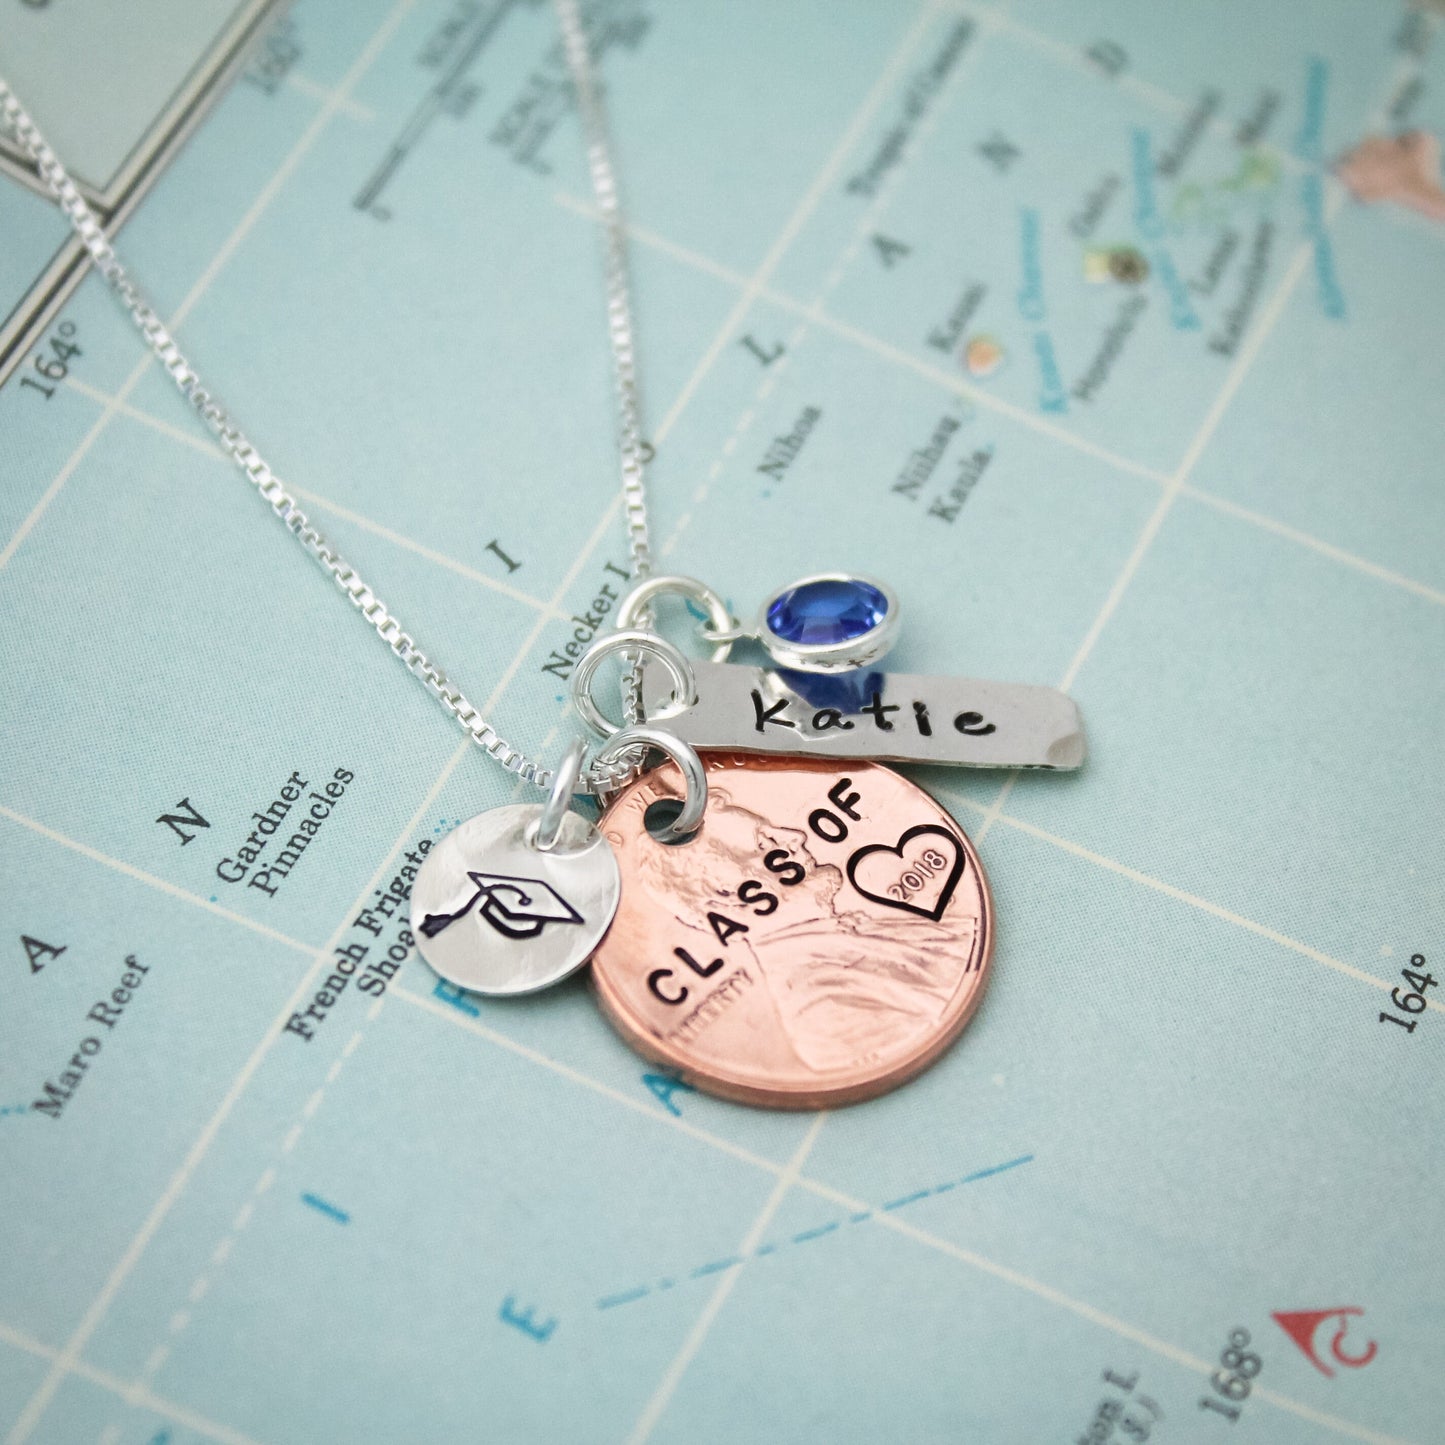 Personalized Lucky Penny Grad Necklace, Graduate Gift, Graduation Gift, Lucky Penny Jewelry, Penny Necklace, Hand Stamped Jewelry